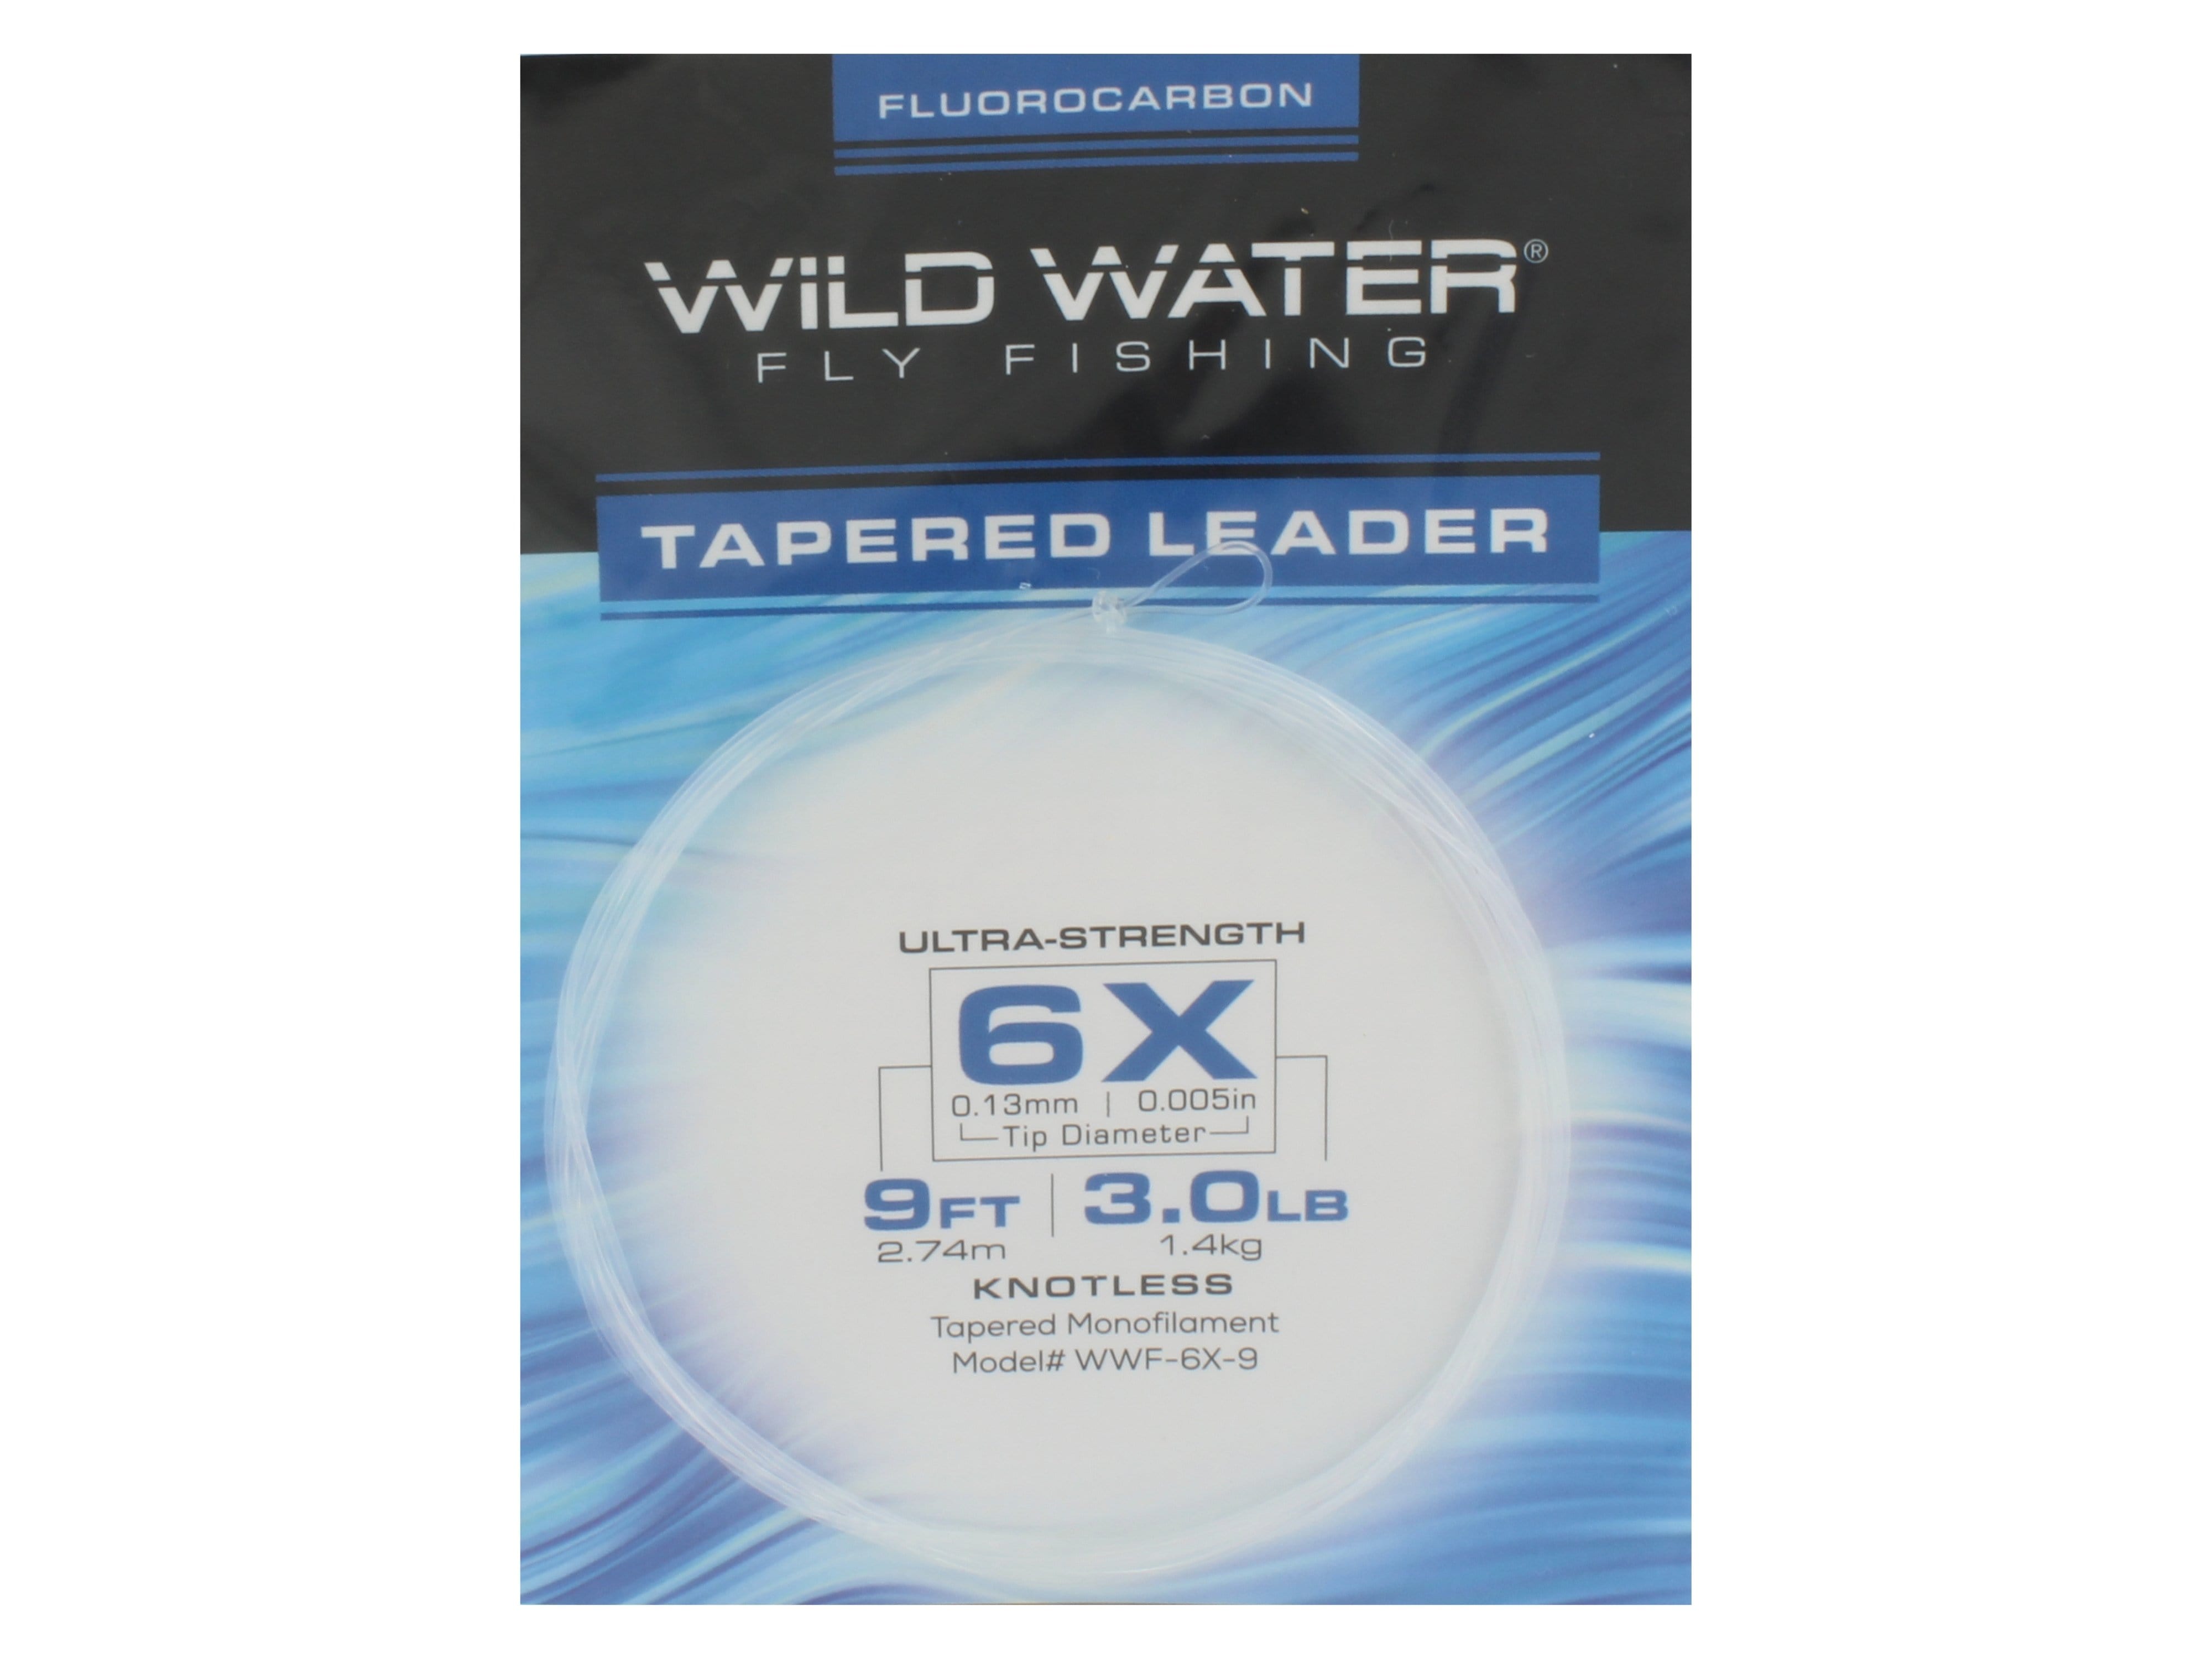 Wild Water Fly Fishing Fluorocarbon Leader 6X, 9', 3 Pack